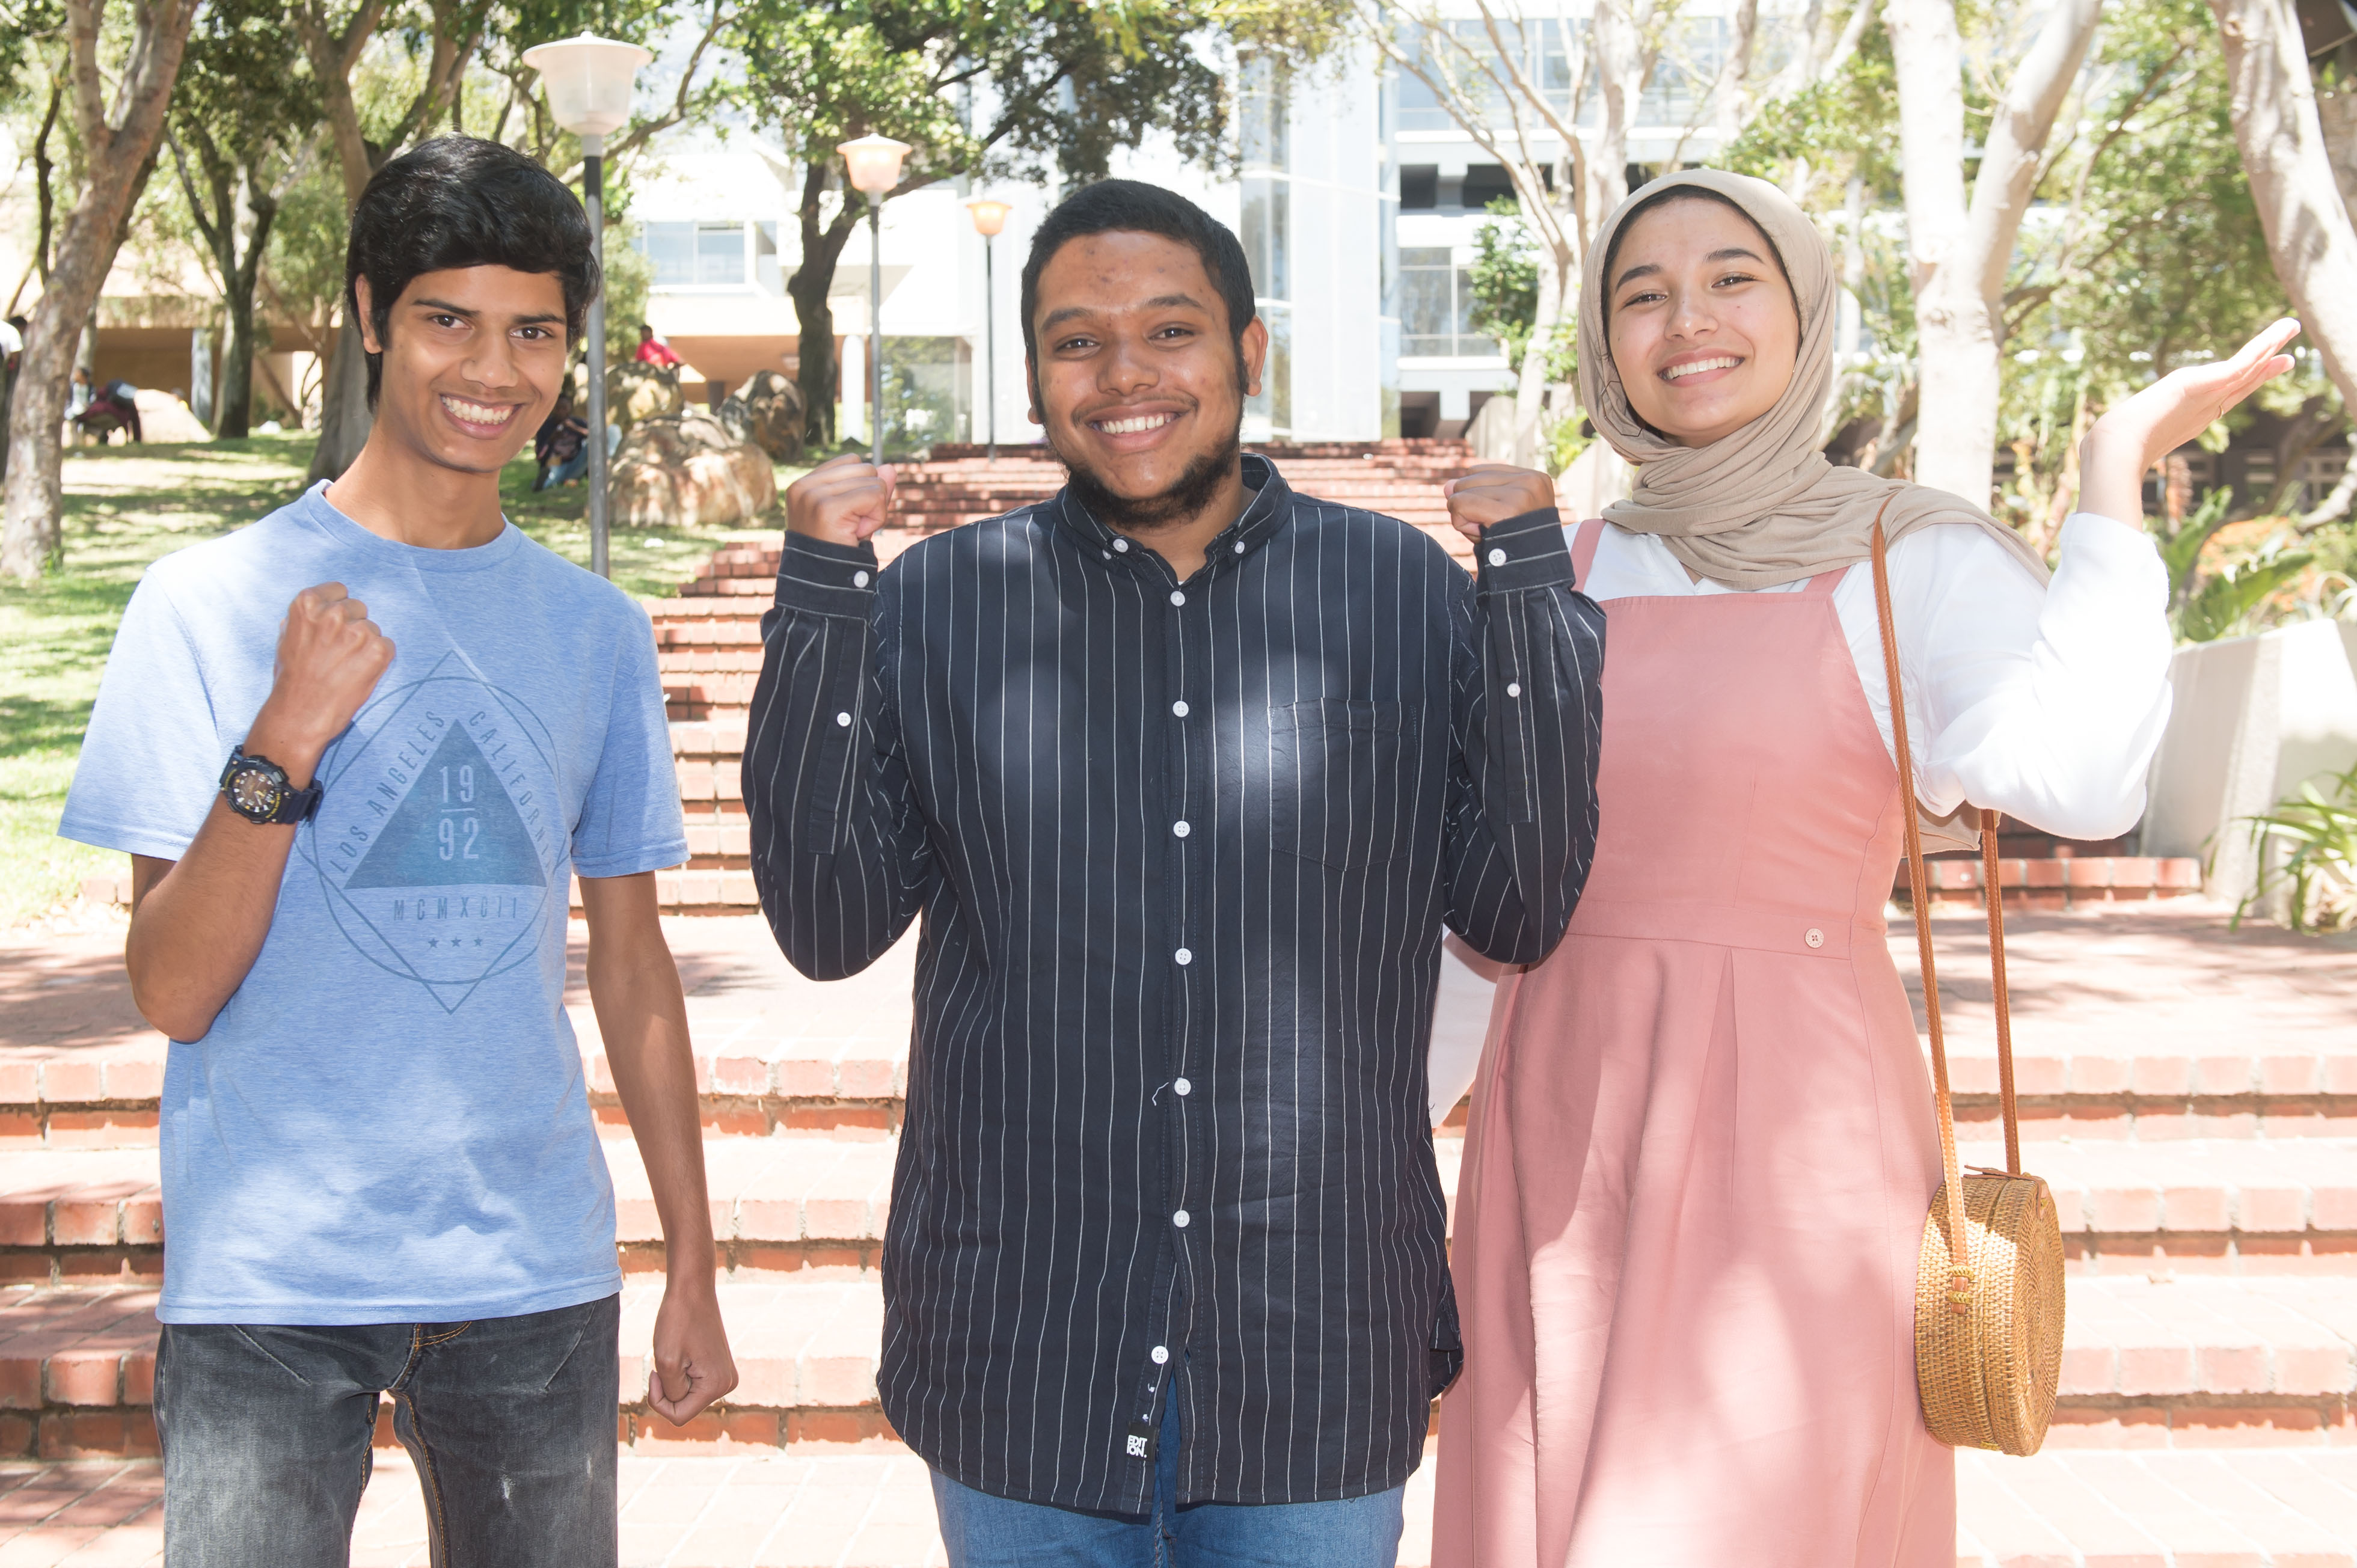 Abdurahmaan Esau from Athlone, is a step closer to realising his dream of qualifying as a medical doctor; supported by Engen, the Rylands High School alumni recorded five distinctions in the 2019 matric examinations.